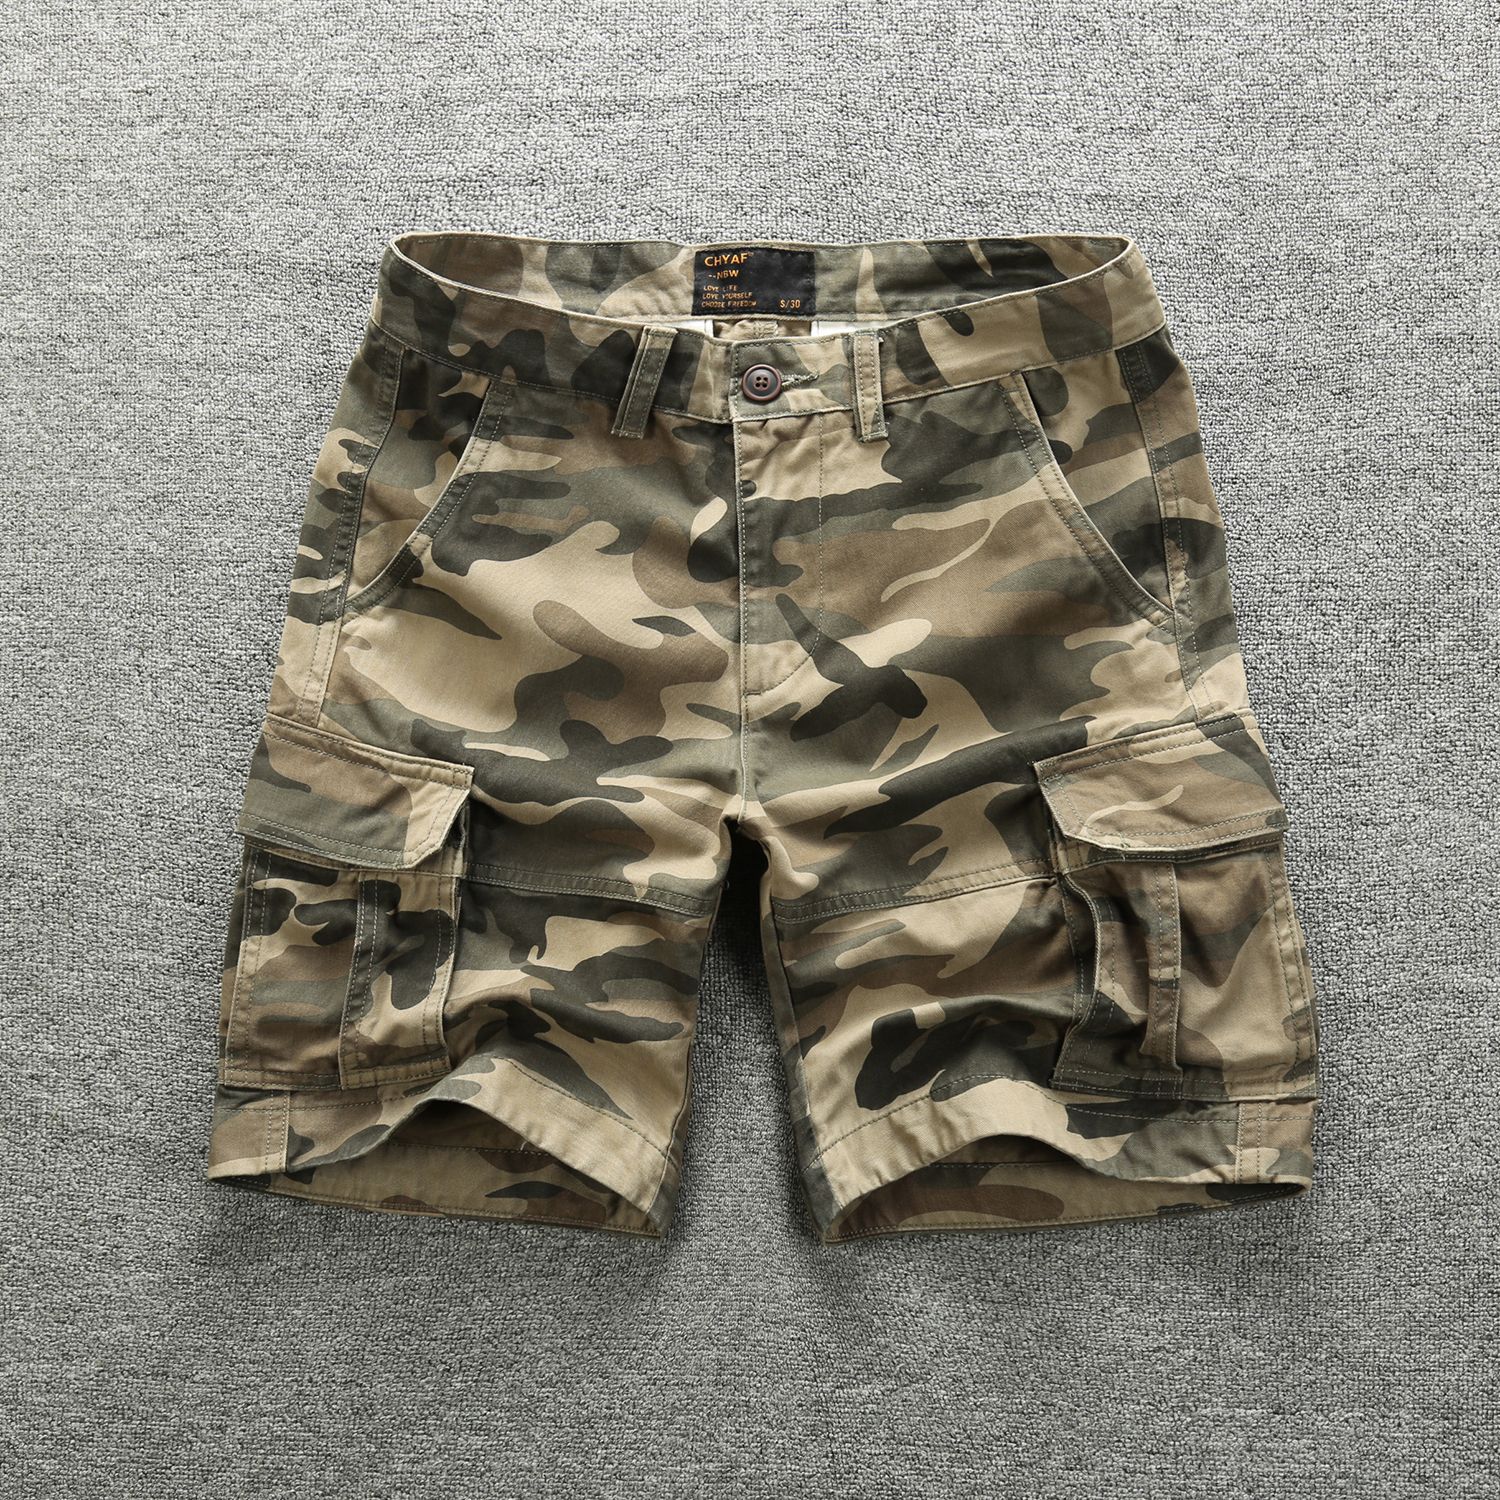 Shorts Men's Casual Camouflage Middle Pants Multi-Pocket Trendy Men's Workwear Fifth Pants Outdoor Loose Middle-Aged Short Breeches